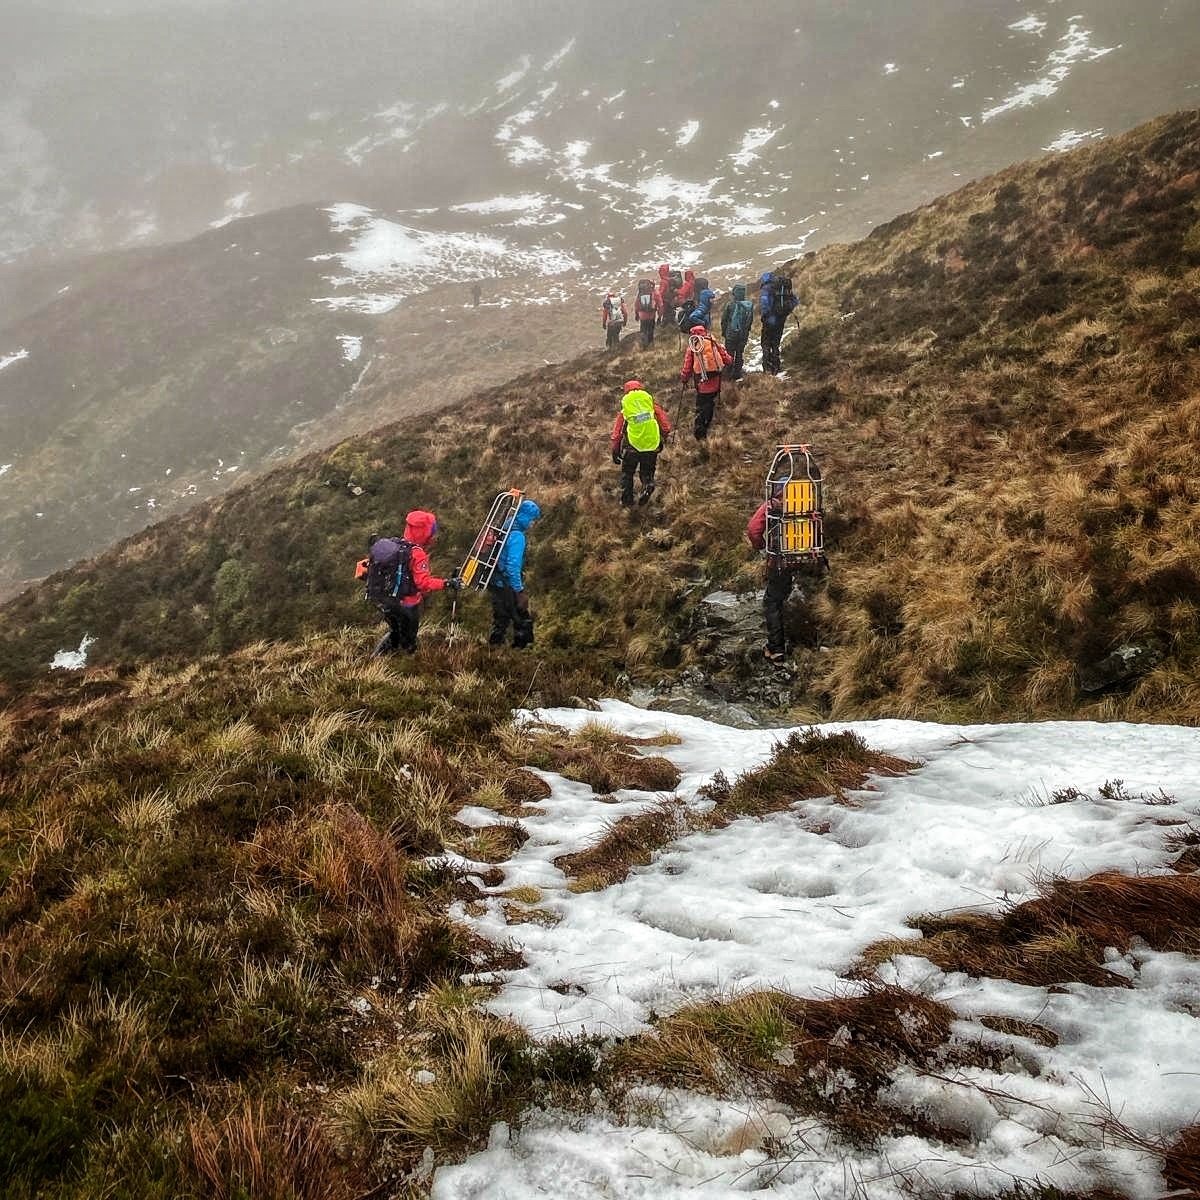 As a Mountain Rescue Team, it's essential that we train in the worst weather conditions that we can be called to work in. Yesterday gave a window of opportunity before the worst of Storm Isha arrived. #ThinkWinter